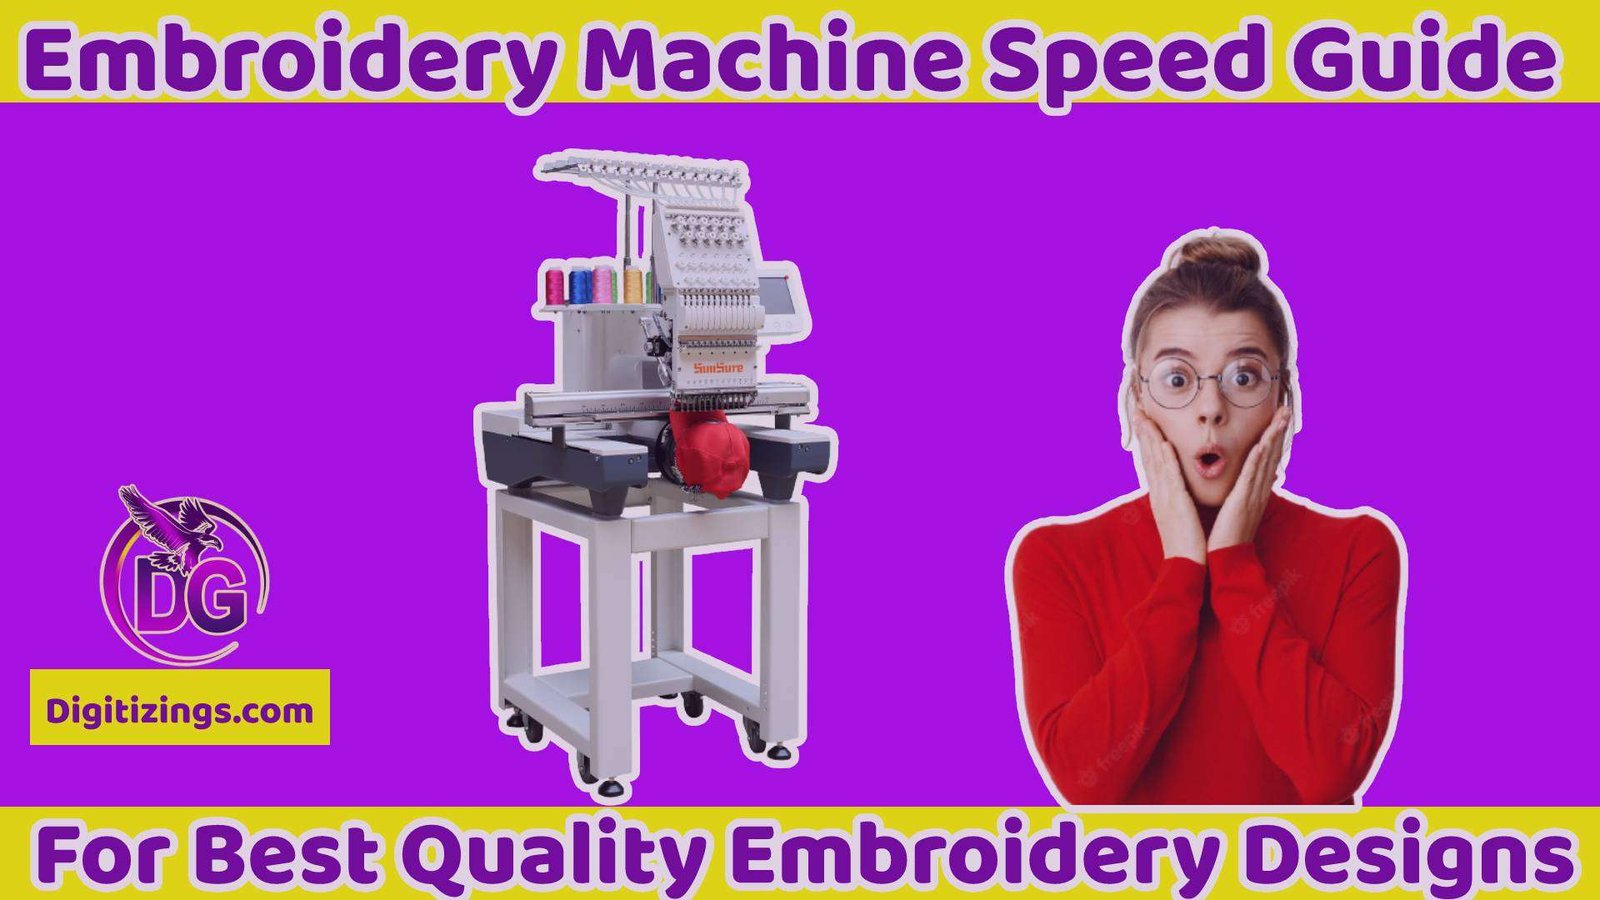 Embroidery Machine Speed Guide For Best Quality Embroidery Designs